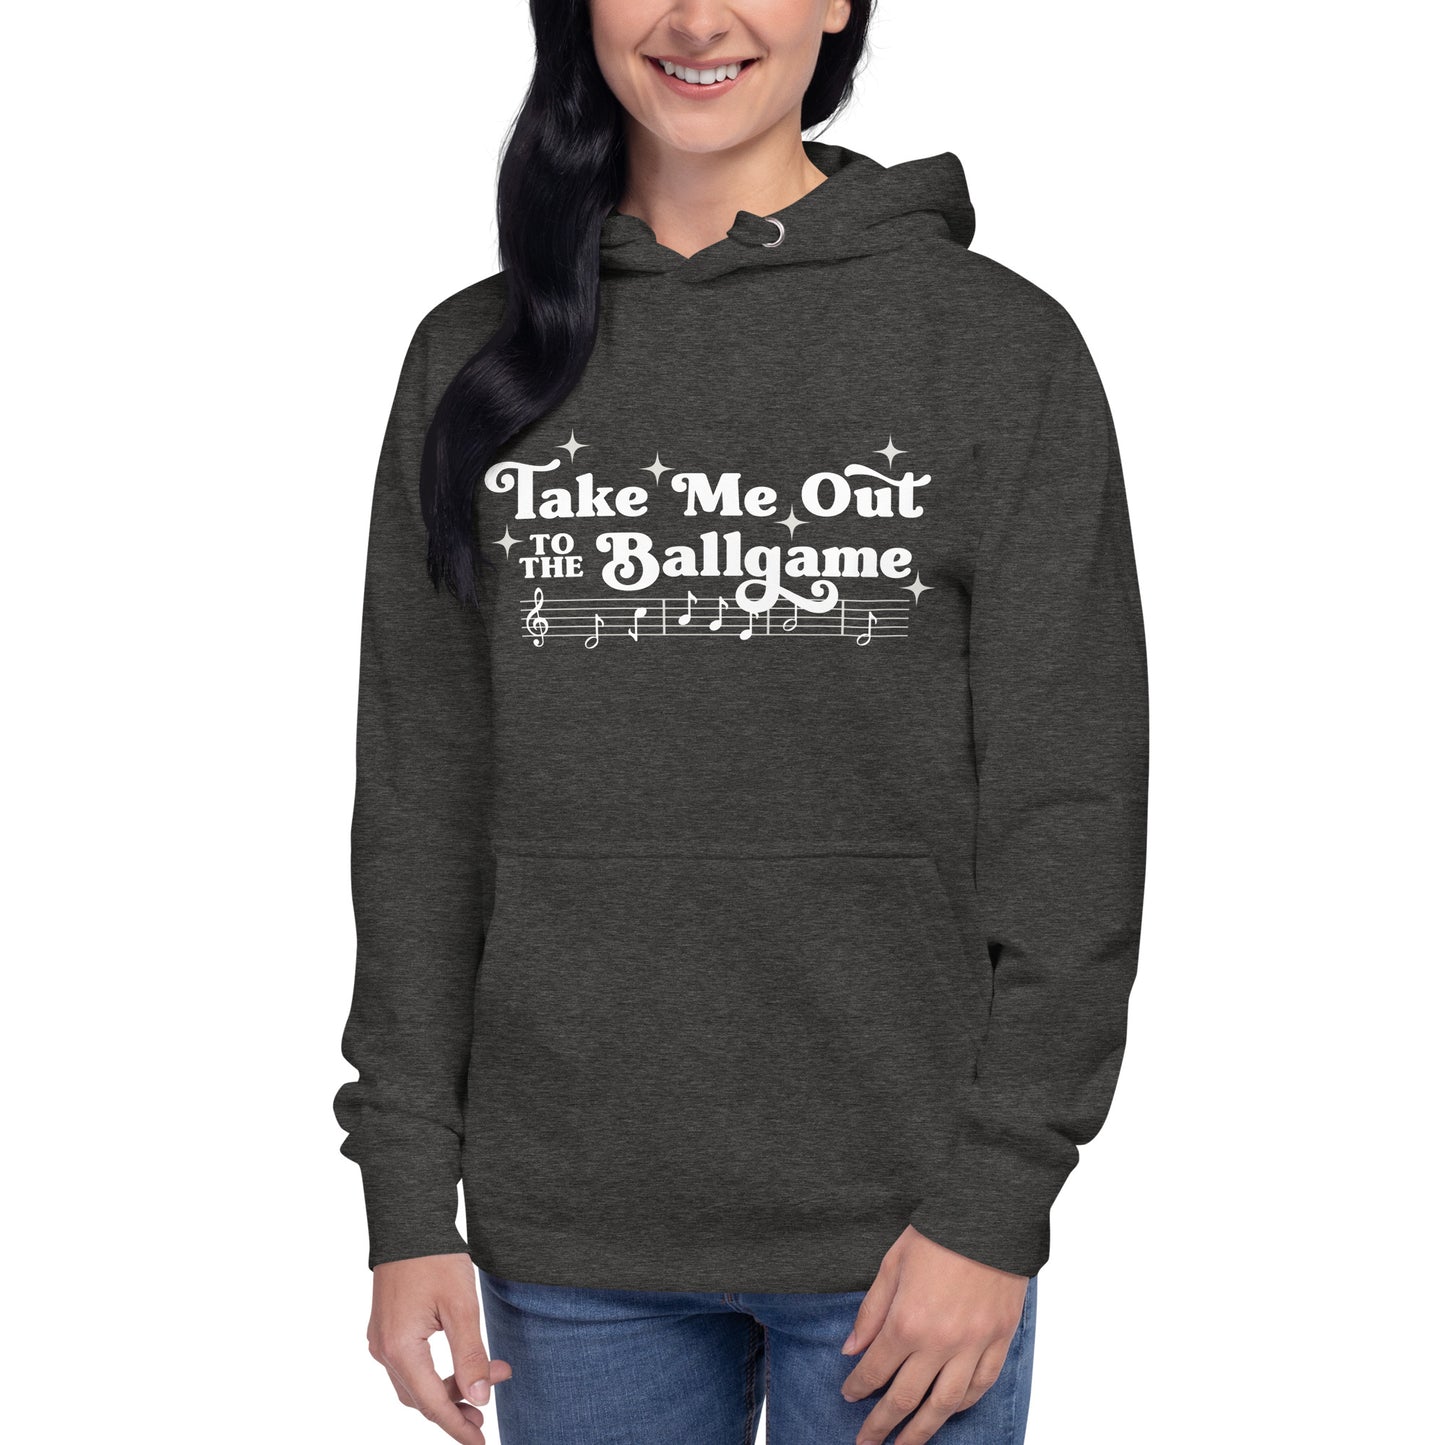 Image of woman wearing heather dark grey hoodie with design of "Take Me Out to the Ballgame" with coordinating musical notes in white located on centre chest. This design is exclusive to Tailgate Mercantile and available only online.